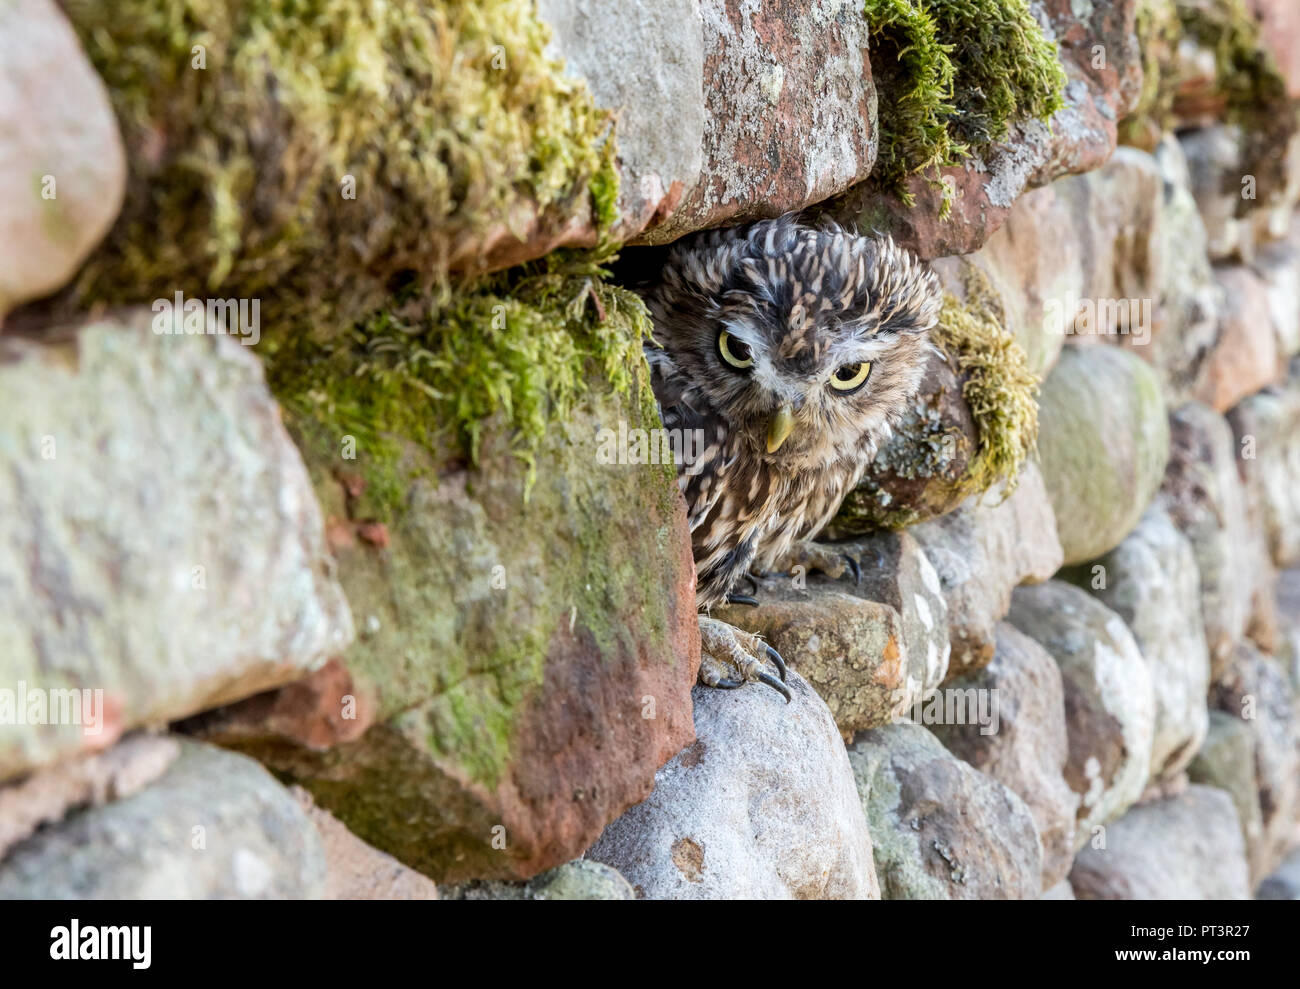 Little Owl (Scientific name: Athene noctua) with frowning face, perched in natural habitat of drystone wall and peeping out of the wall to the left. Stock Photo